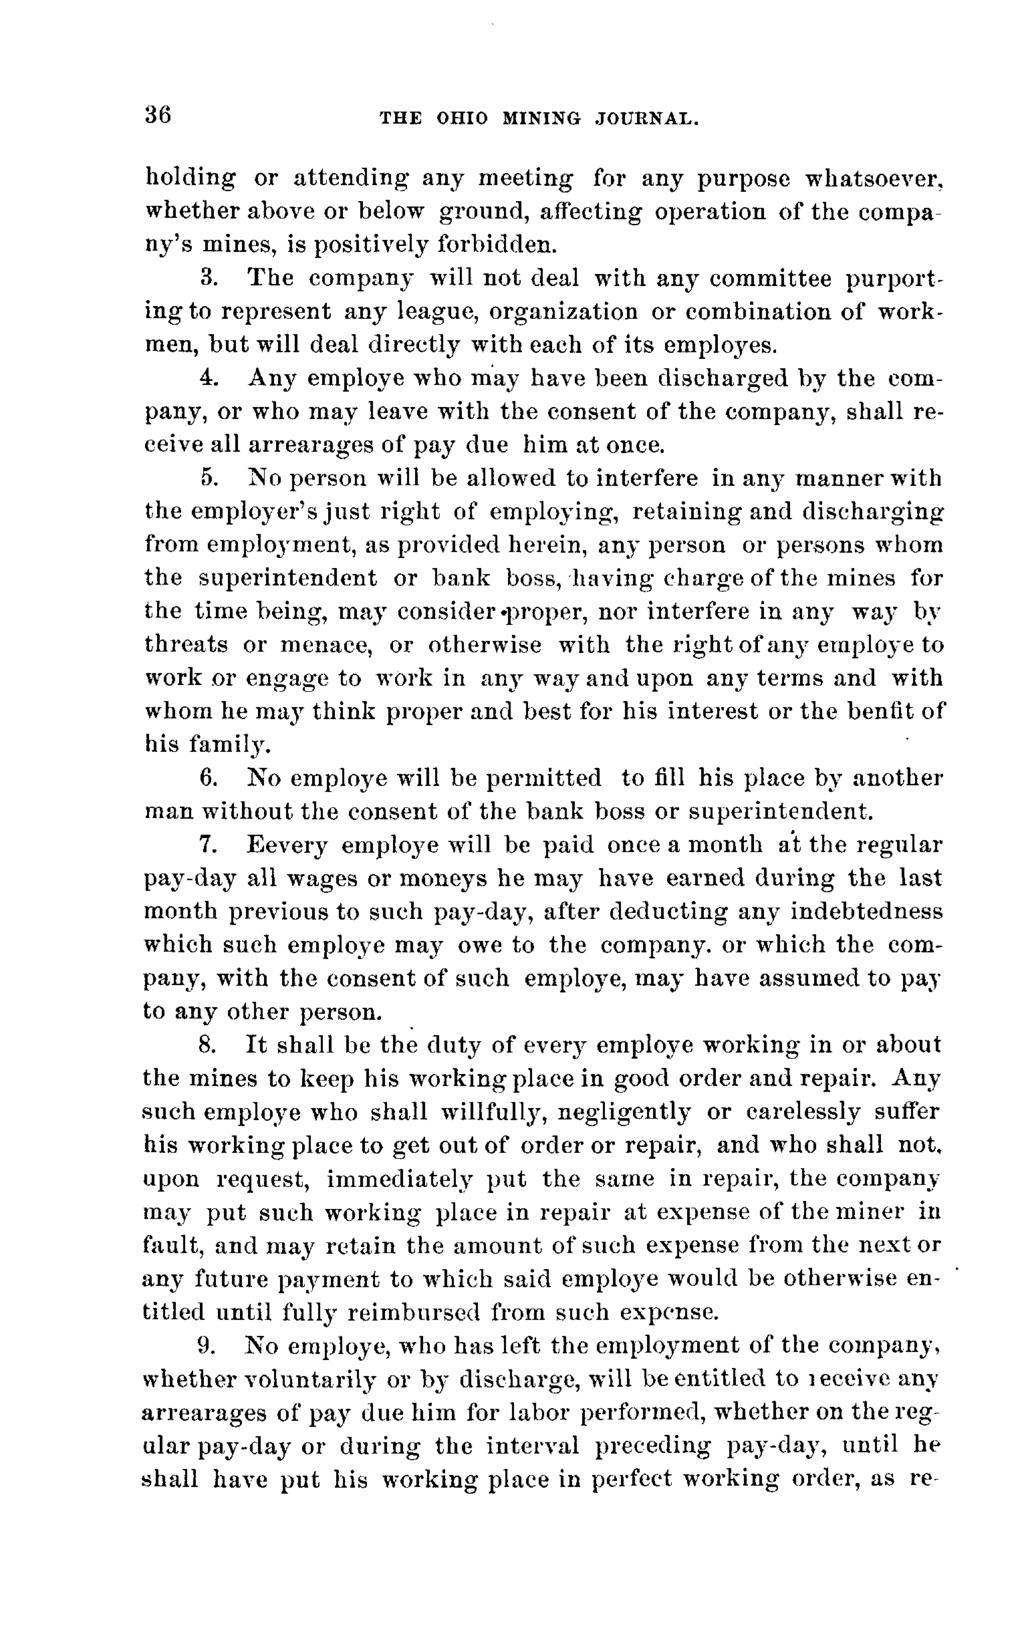 36 THE OHIO MINING JOURNAL. holding or attending any meeting for any purpose whatsoever, whether above or below ground, affecting operation of the company's mines, is positively forbidden. 3.